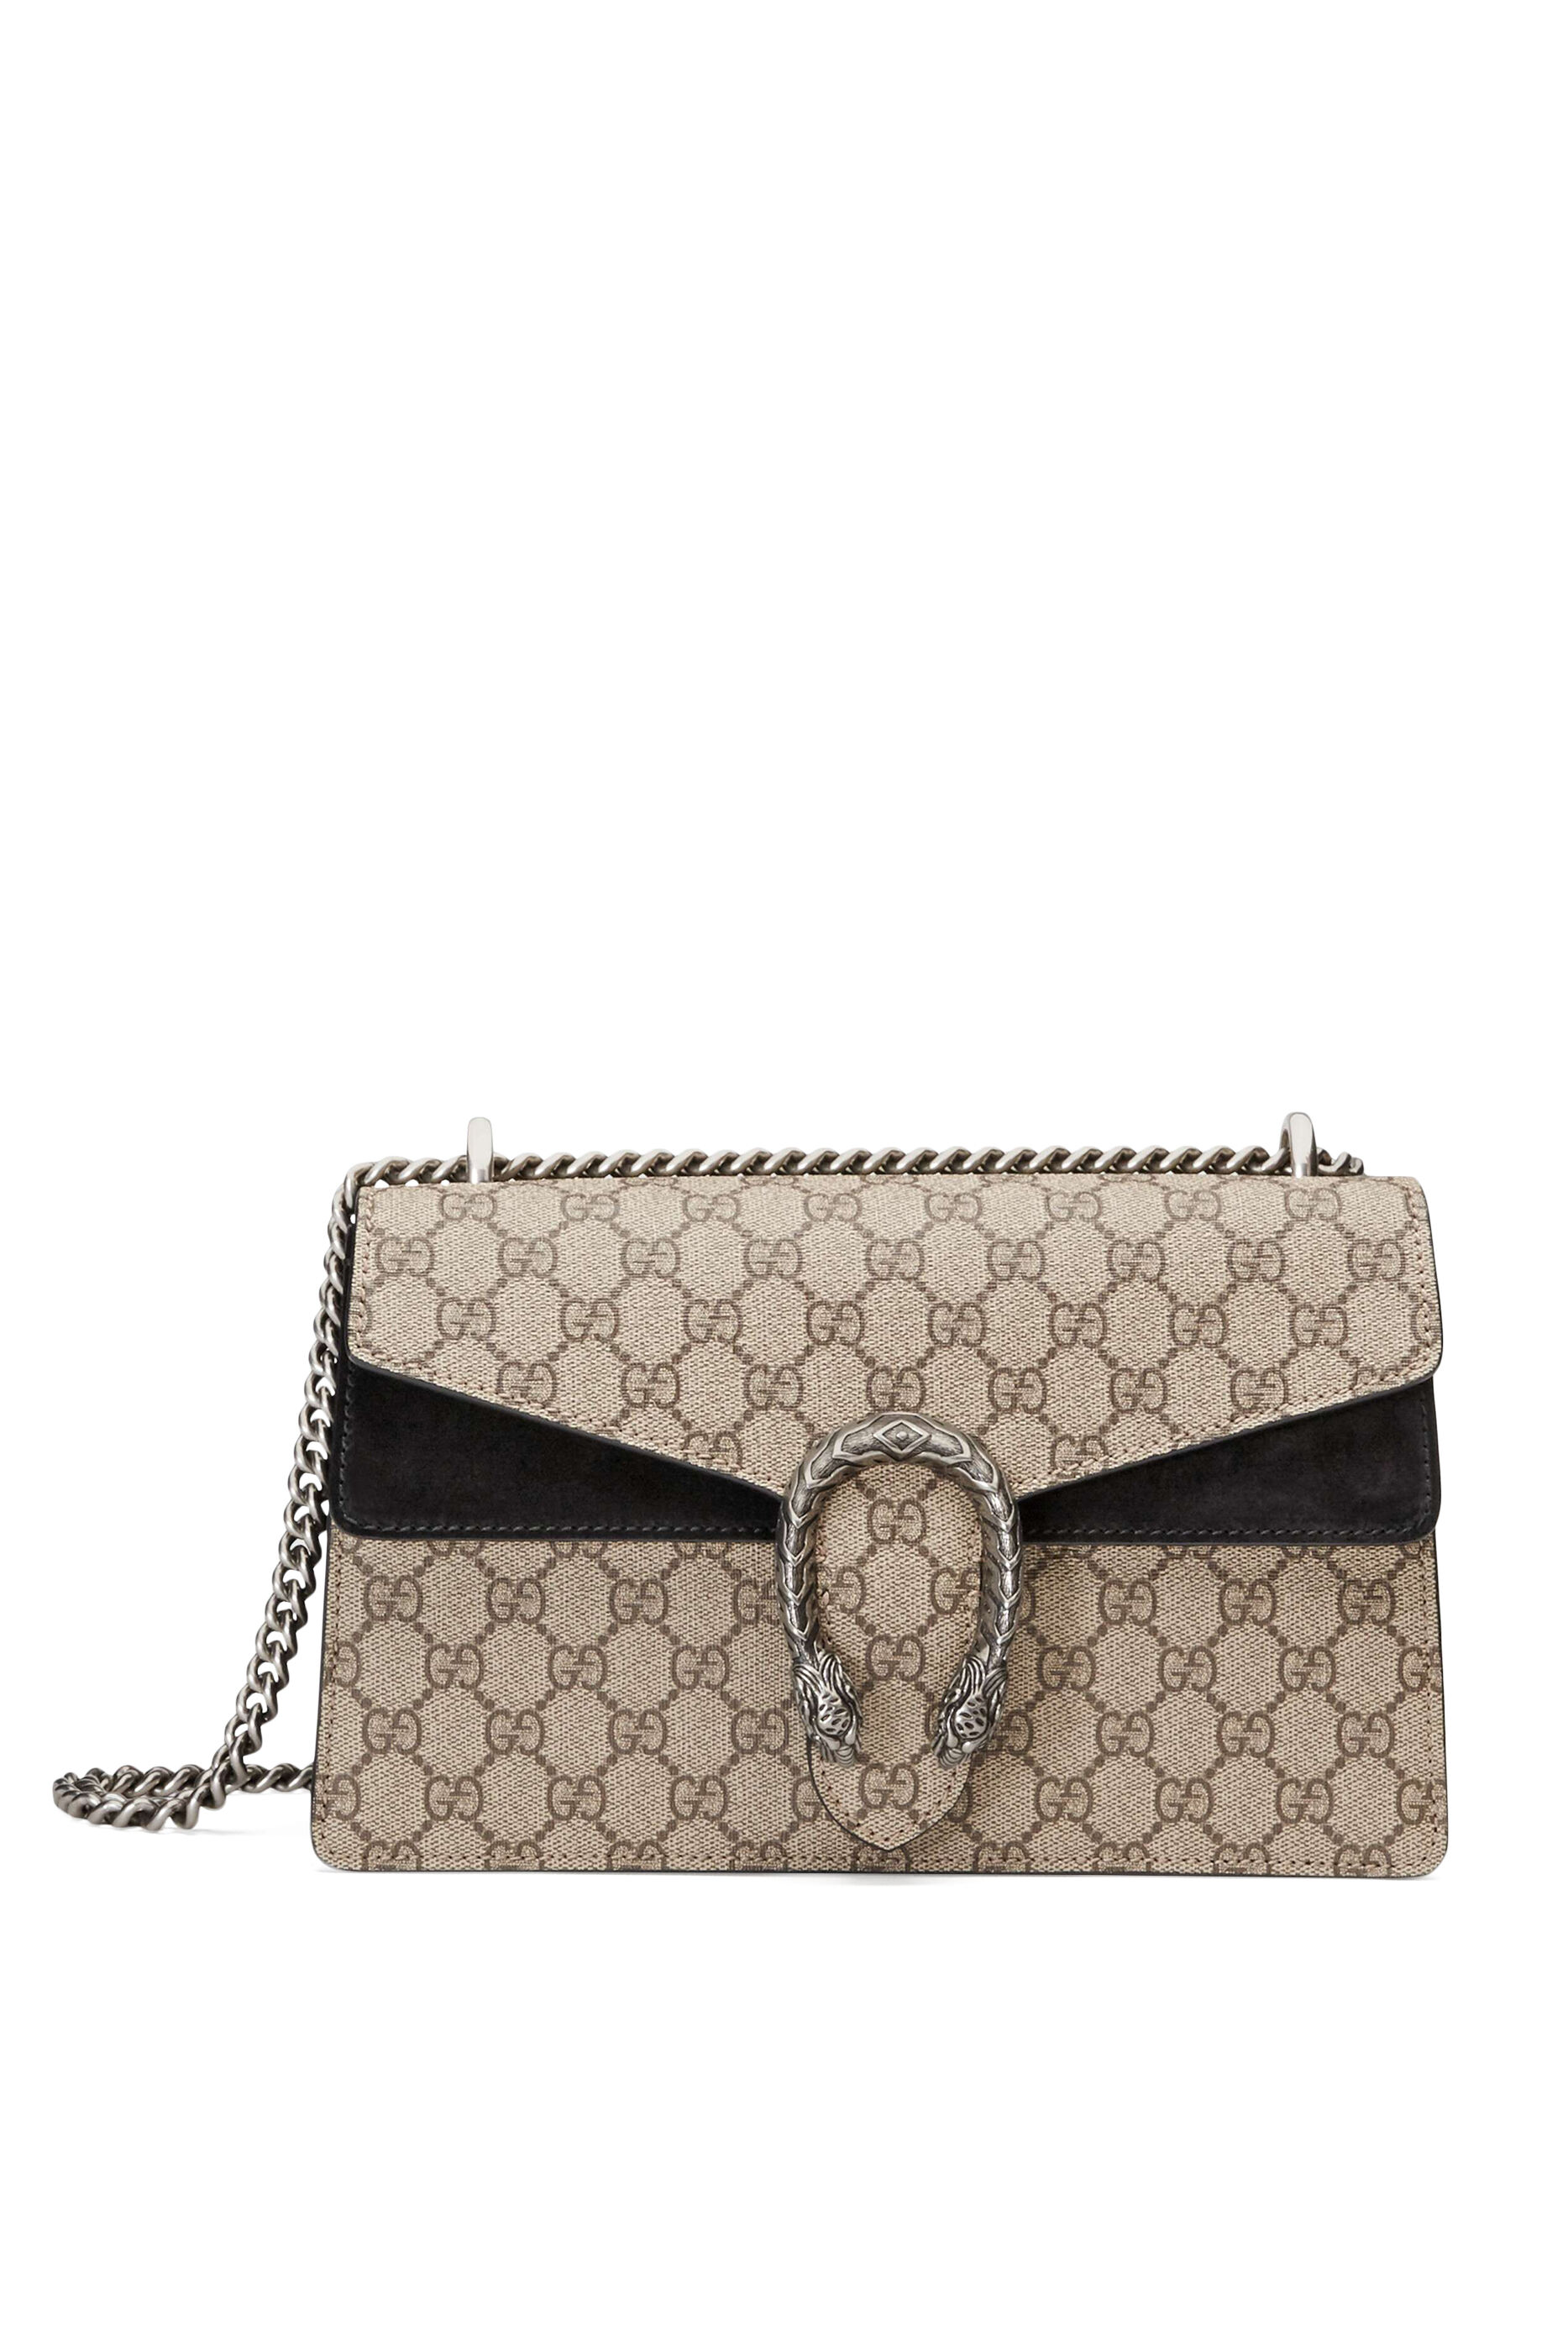 gucci small gifts